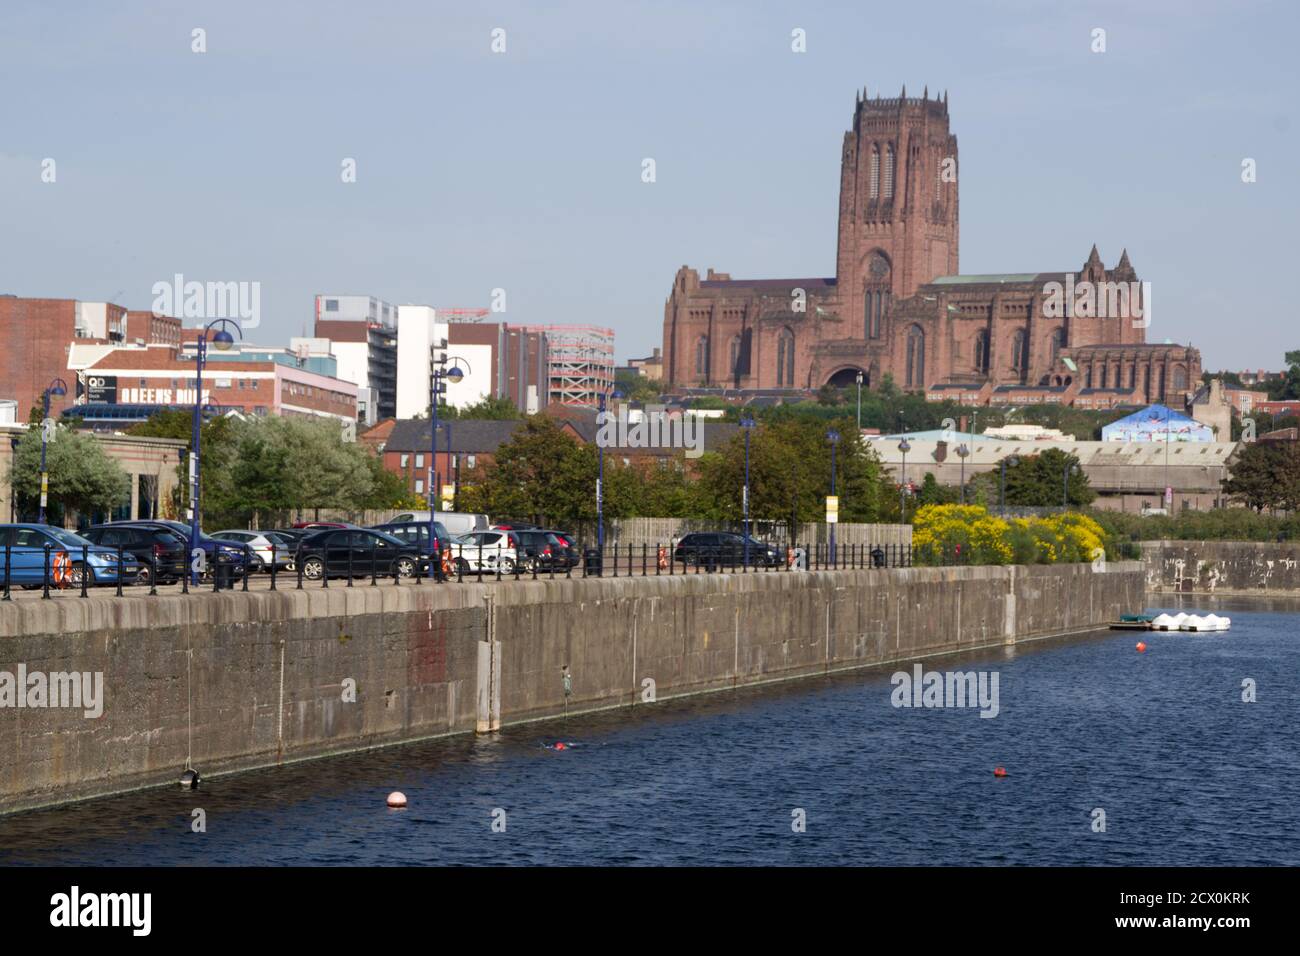 Liverpool Anglican Cathedral, viewed from the riverside. Stock Photo